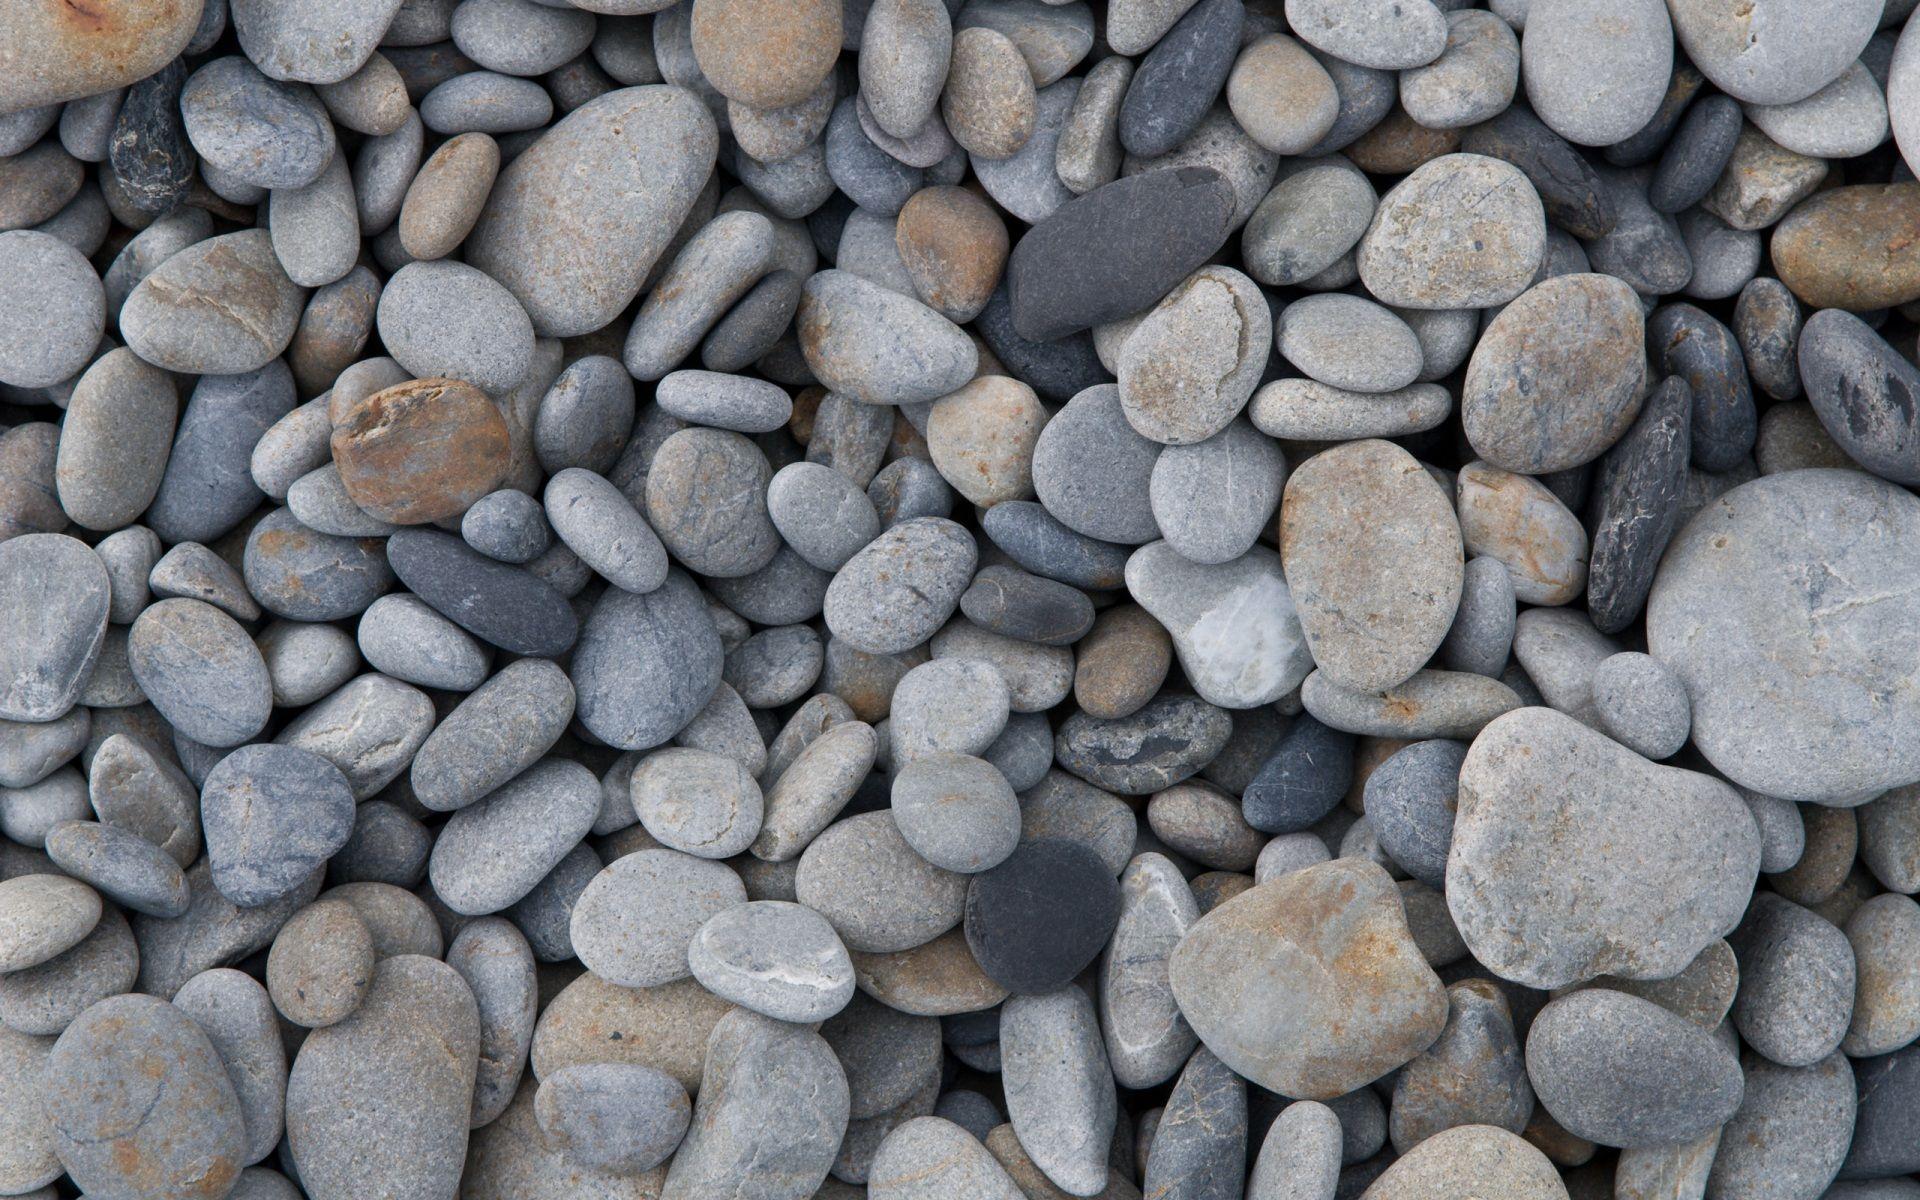 Pebble Wallpaper, Pebble Image for Windows and Mac Systems